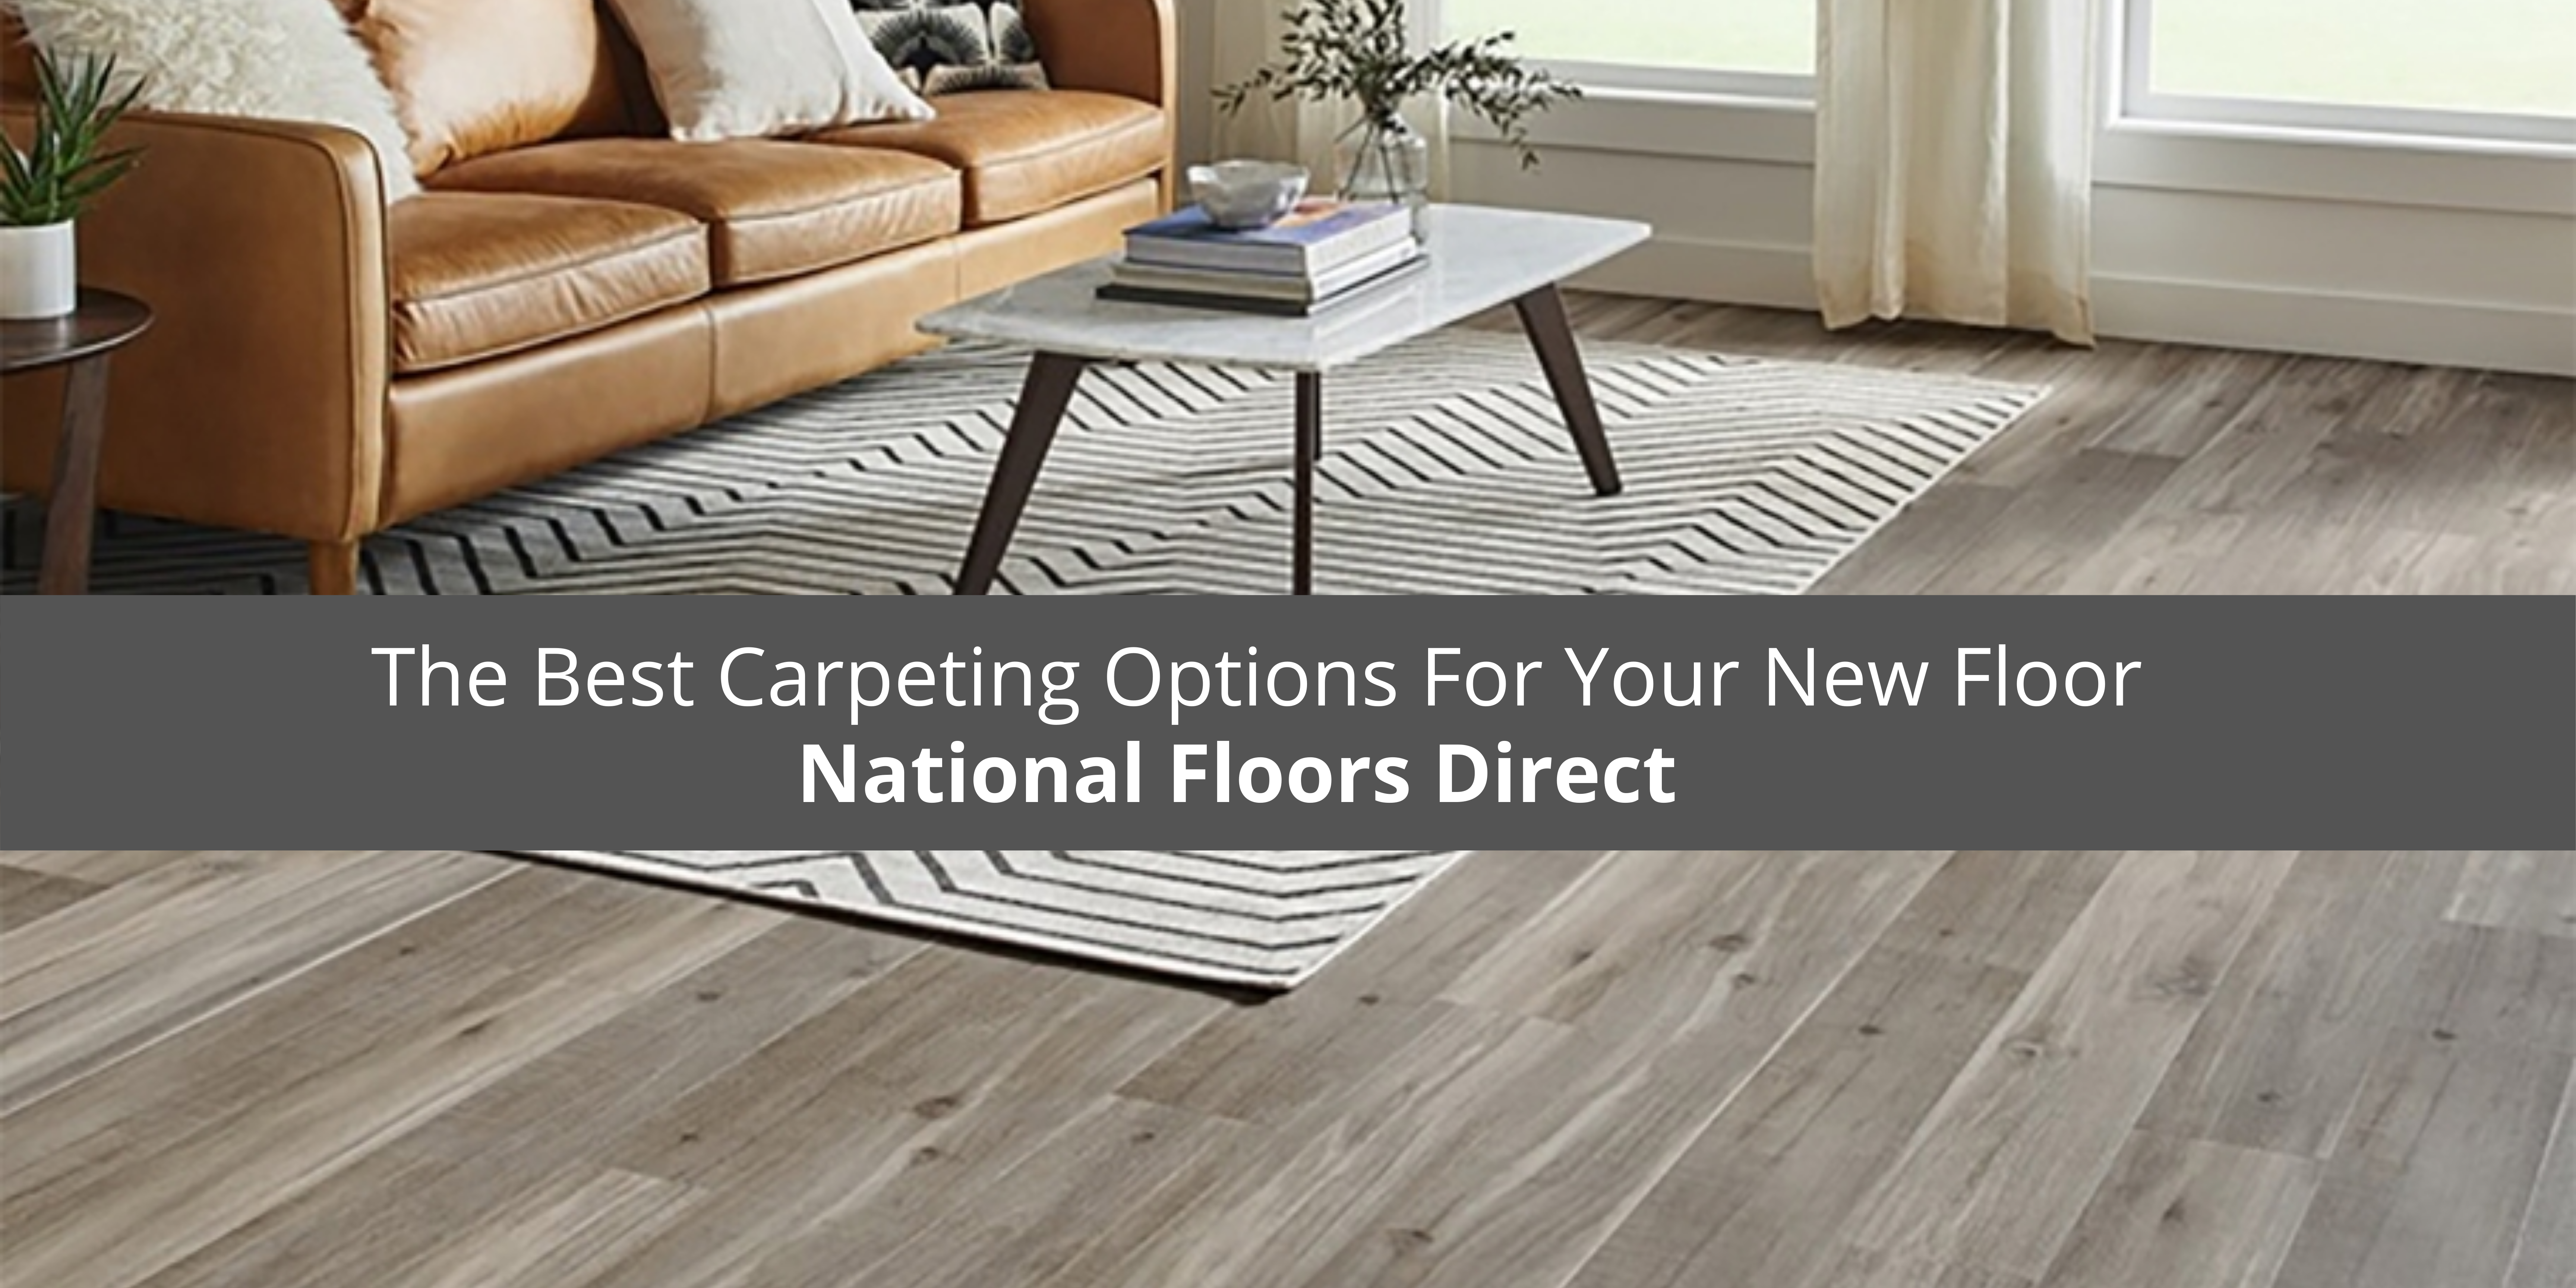 National Floors Direct Reviews The Best Carpeting Options For Your New Floor